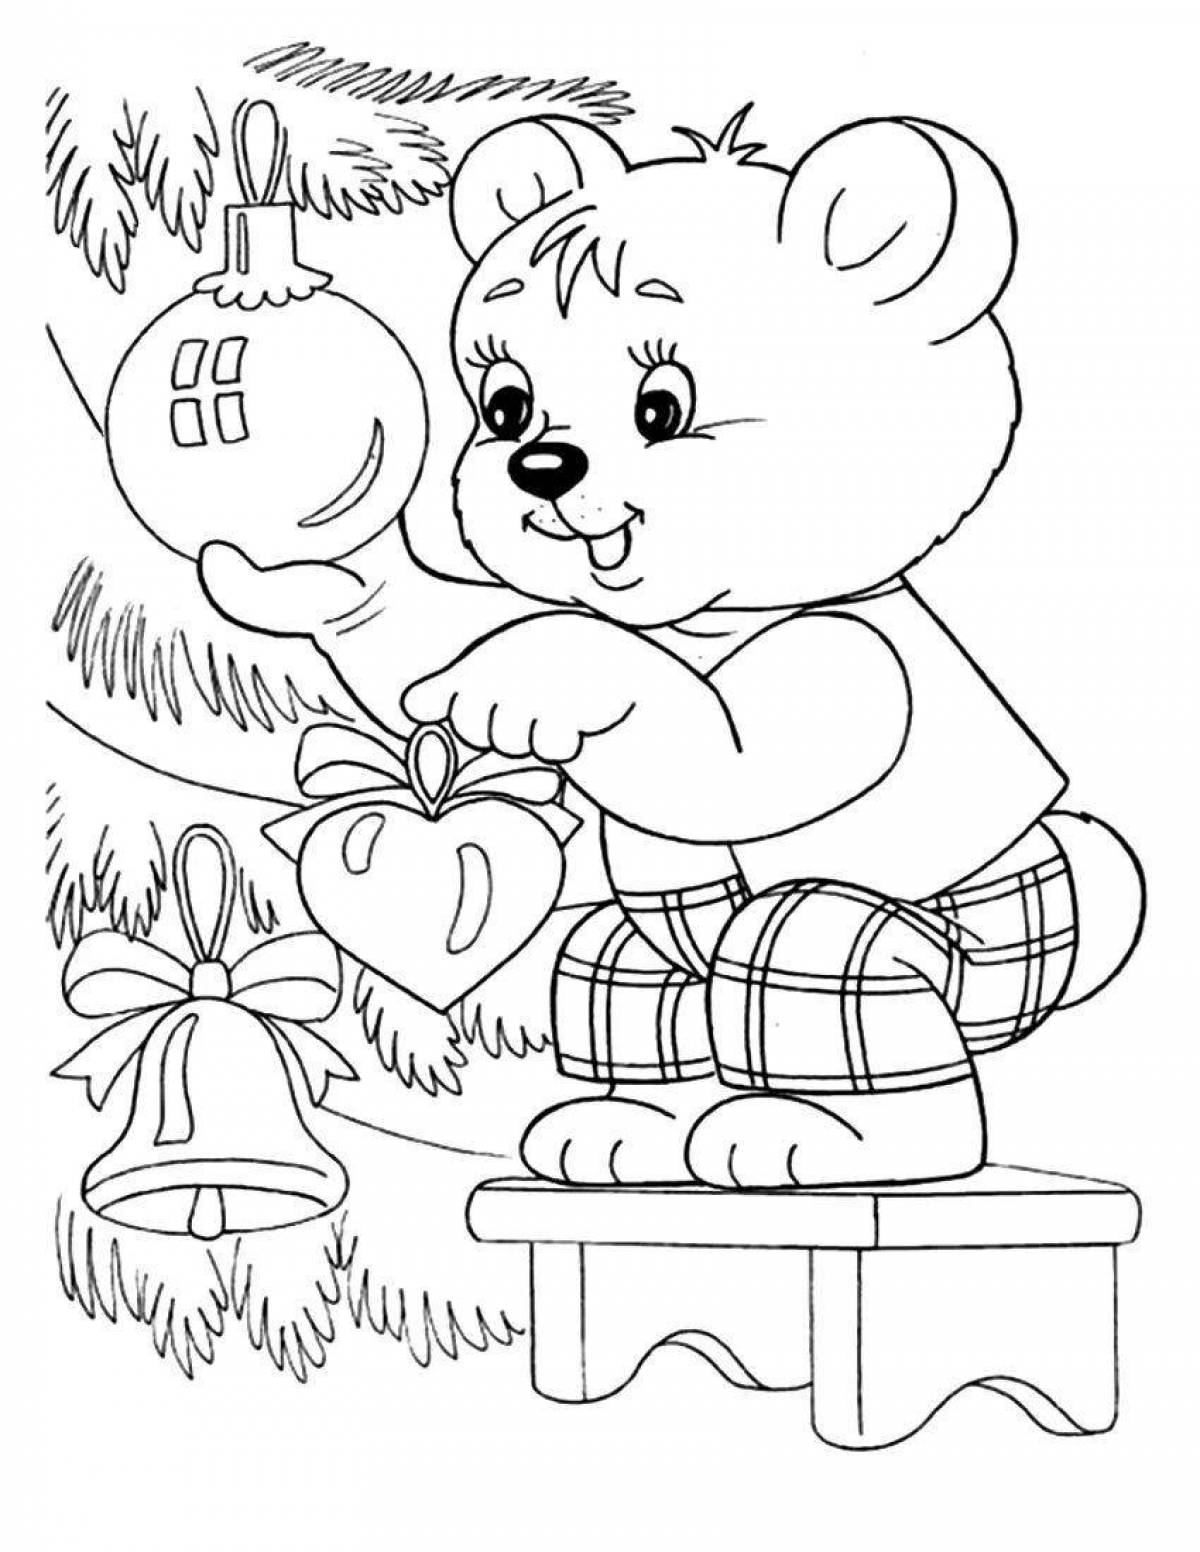 Colorful Christmas animals coloring pages